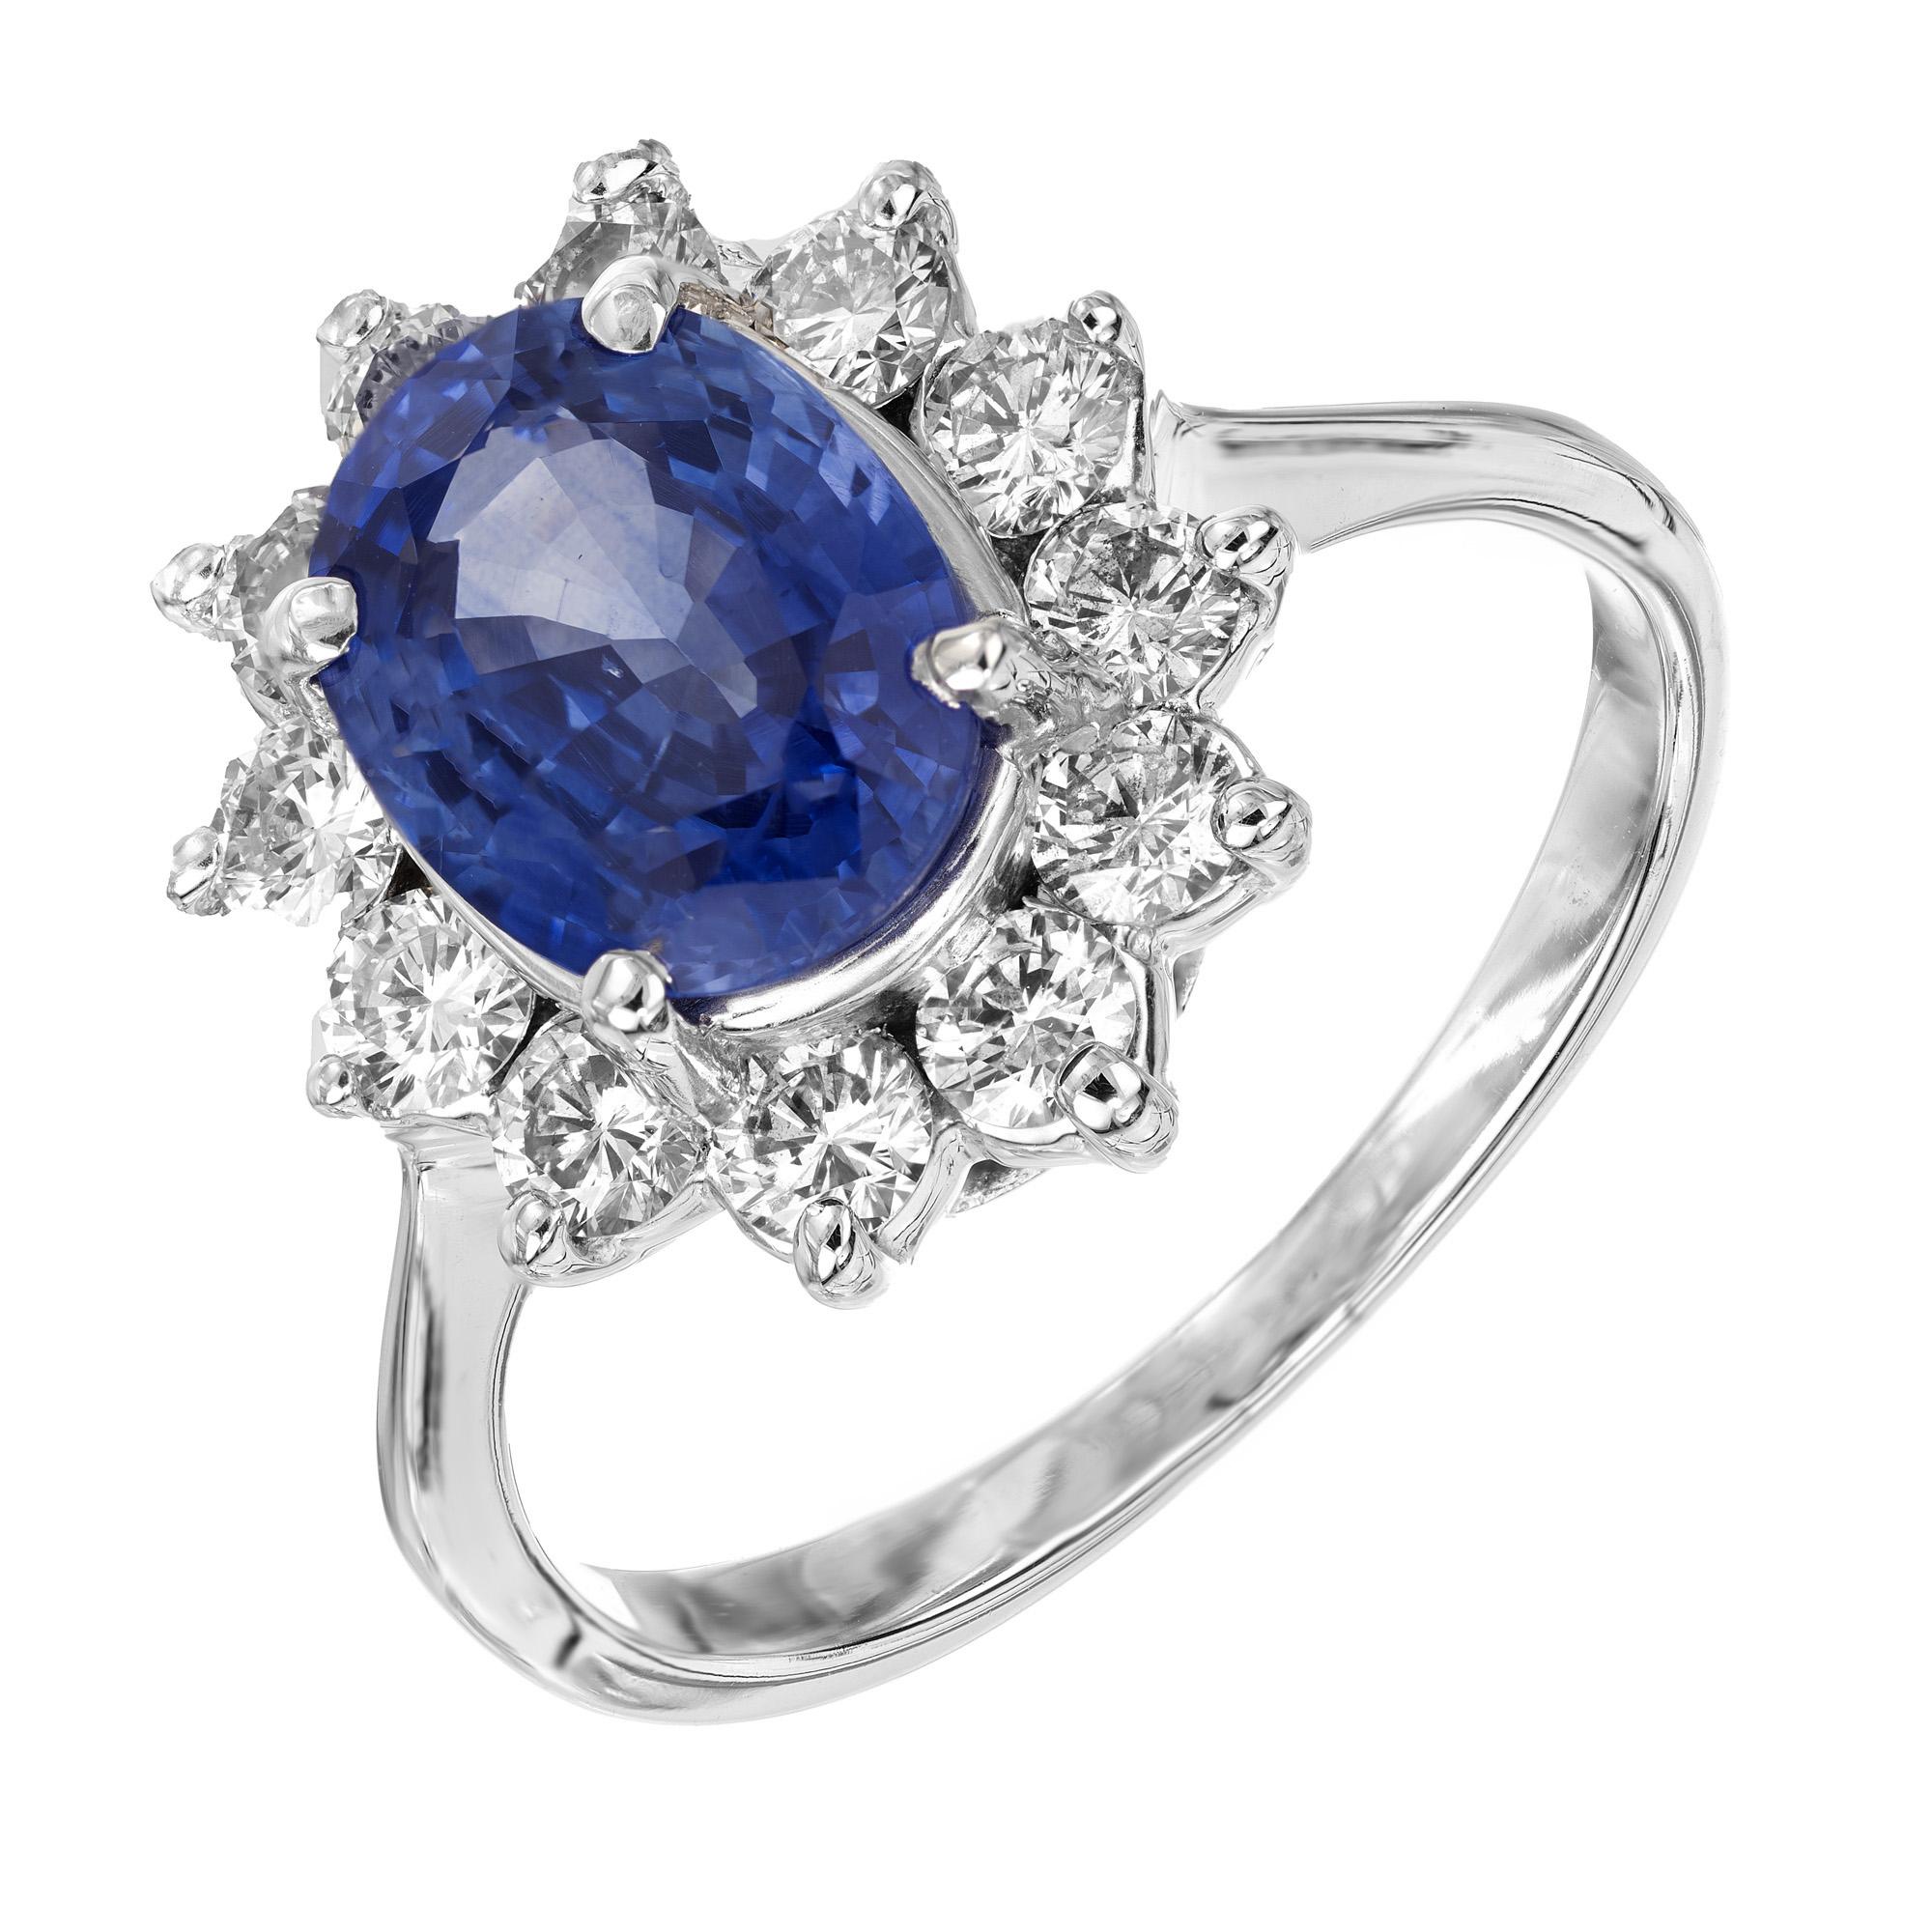 This stunning oval 2.11ct sapphire is mounted in a 14k white gold setting. Accented by a halo of 12 round brilliant diamonds. The GIA has certified the sapphire as natural, with simply heat. Classic style and design. 

1 oval blue sapphire, approx.